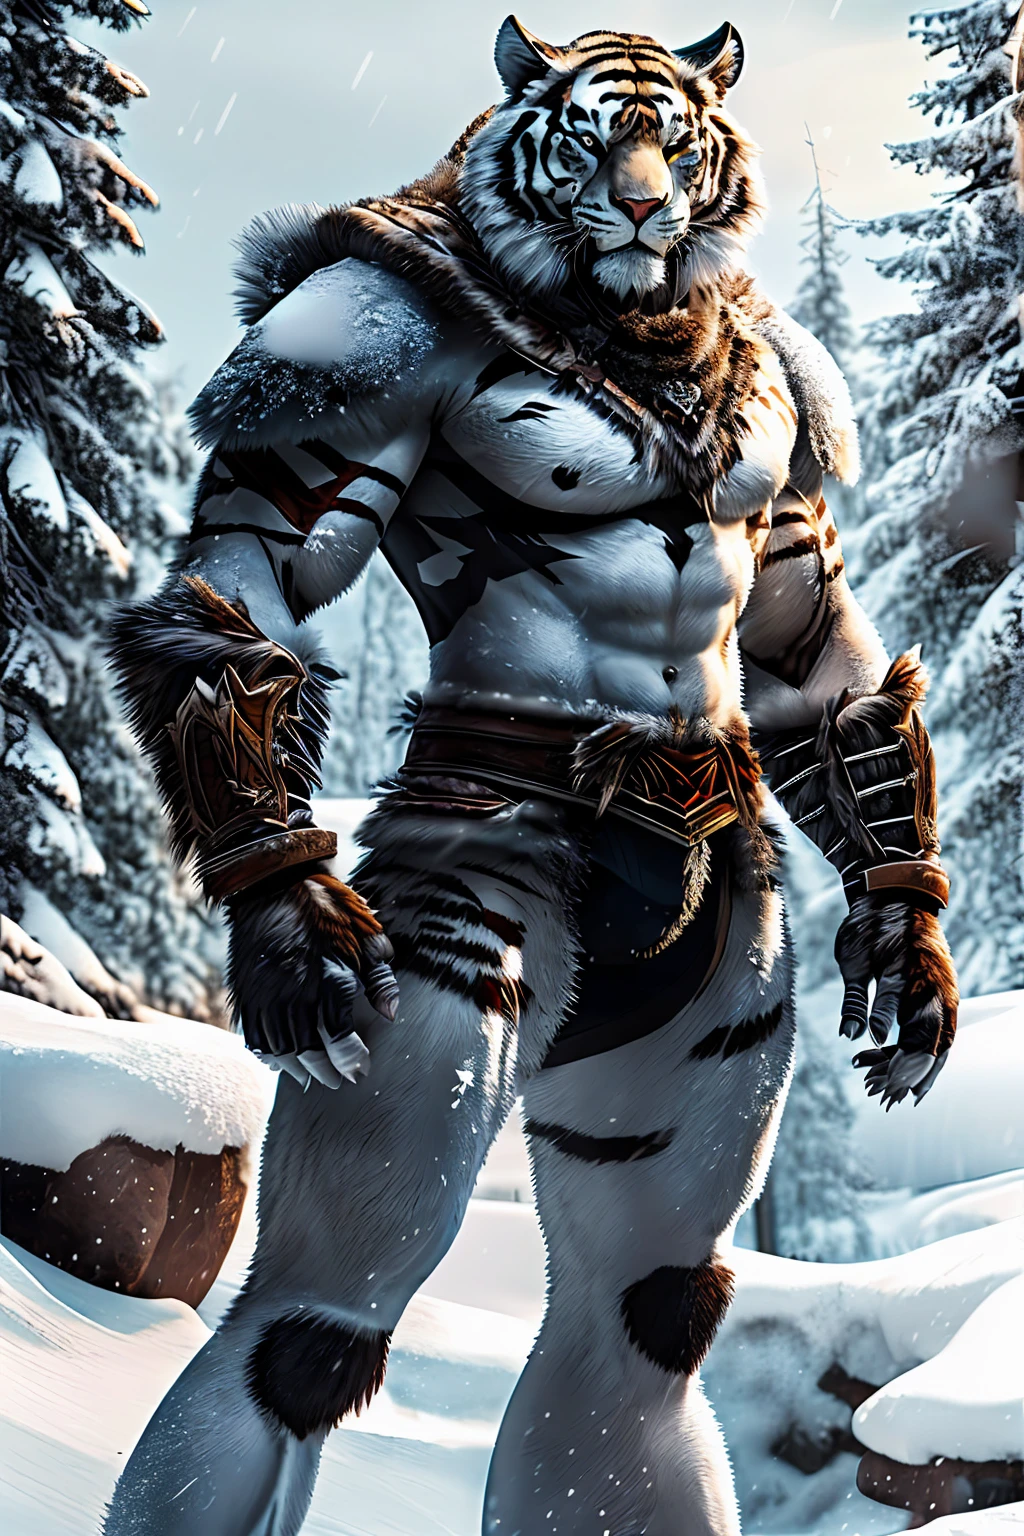 Mutant tiger standing on two legs, snow background, Brutal!, put on armor, Big claws, Thirsty for blood, Big one, Thick fur, no back panel, snow backgroundมืดมิด, conjunctivitis, Demonic Aura